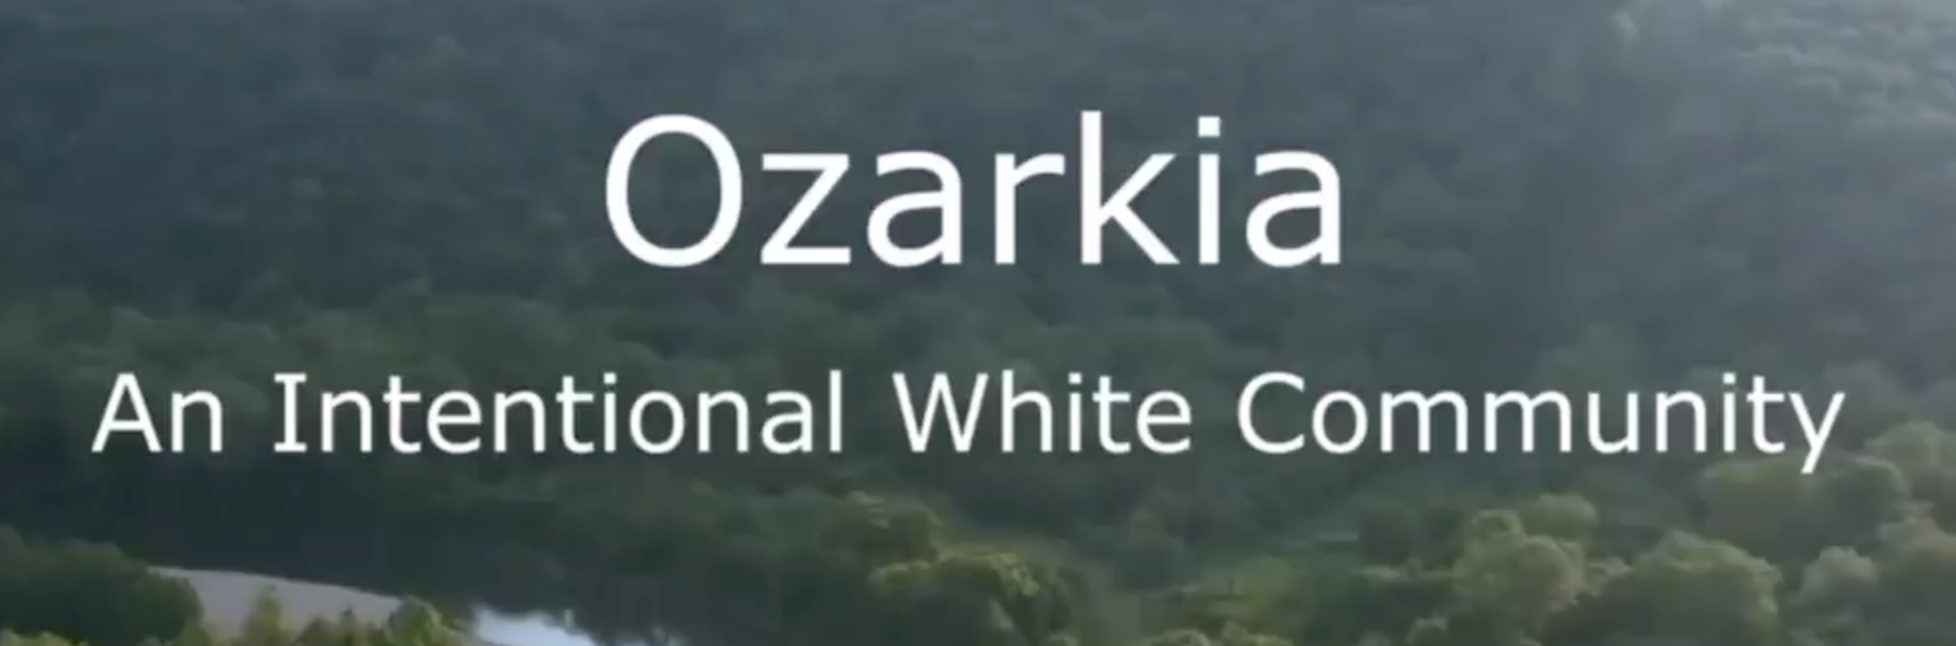 (Right Wing Extremism / Video) Ozarkia An Intentional White Community (Northern Arkansas and Southern Missouri, United States) - 02 August 2023